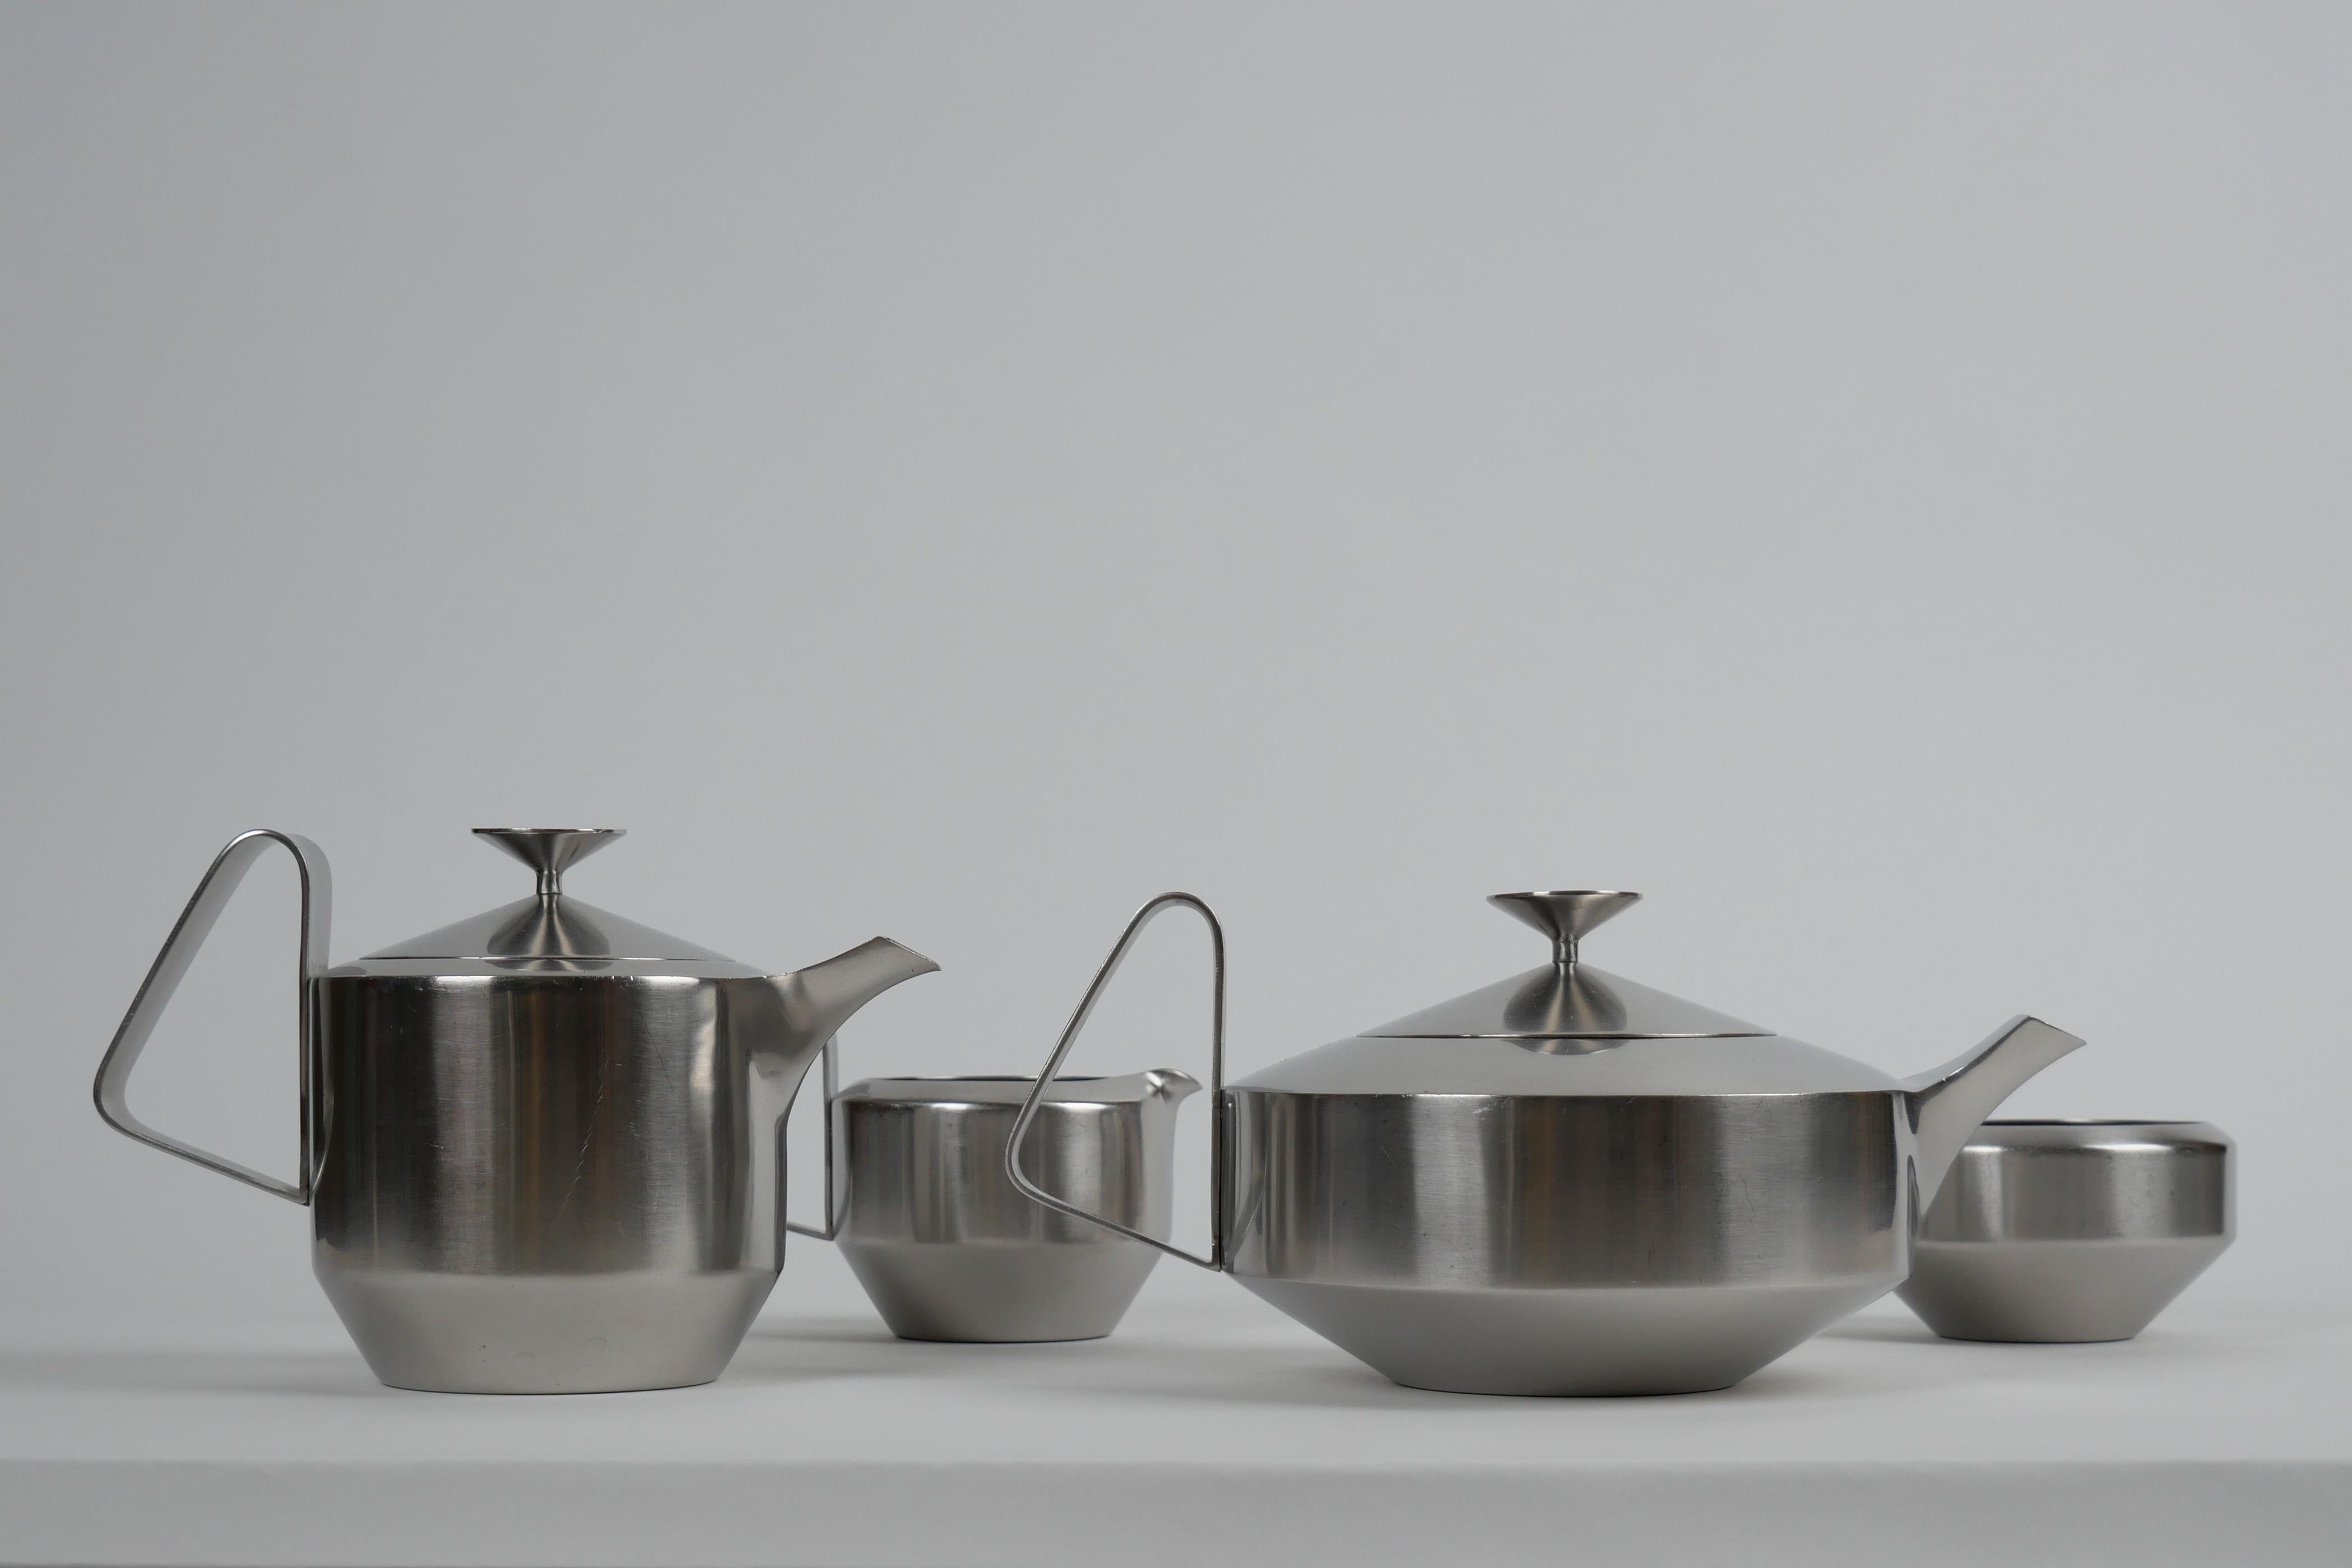 Robert Welch for old hall, 1962-4
Alveston tea set

Stainless steel
Good condition, with light marks
Makers stamp to underside of each

A super, mid-century set, elegant as a display set but also fully useable, reminiscent of the work of the